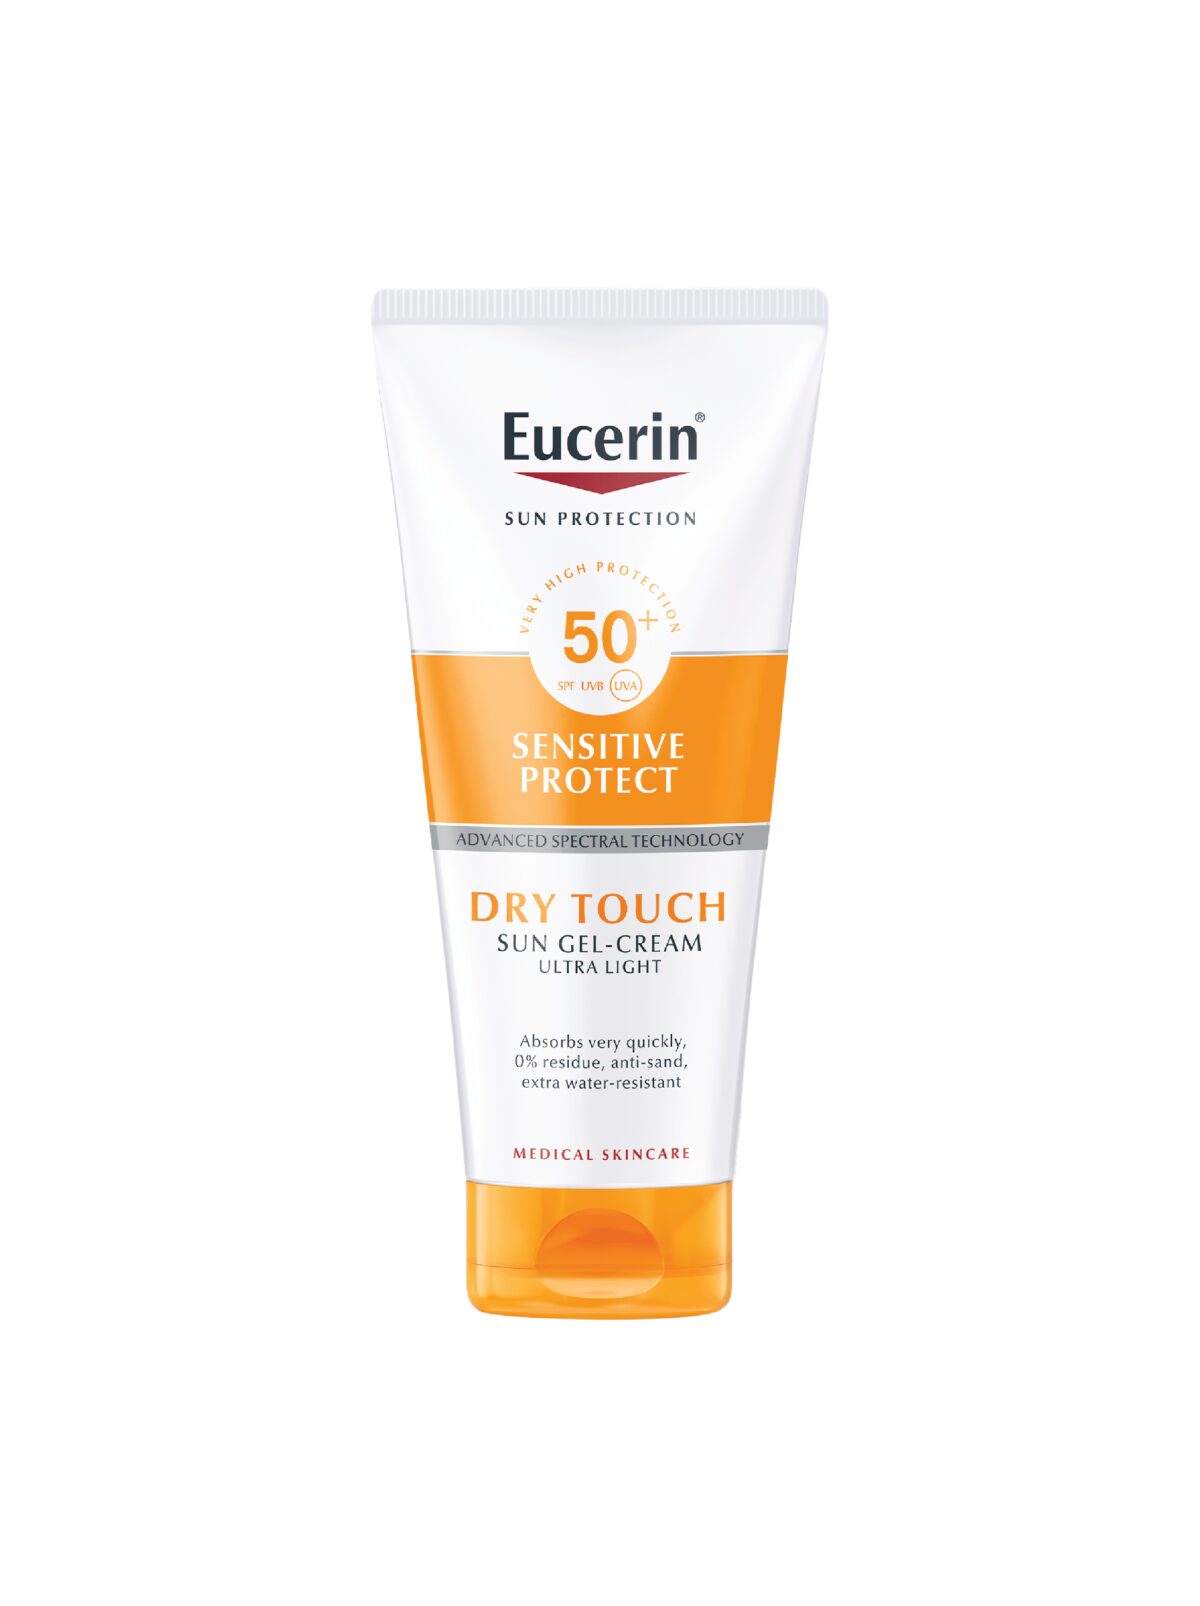 sunscreen - body gel - lotion - dry touch - eucerin